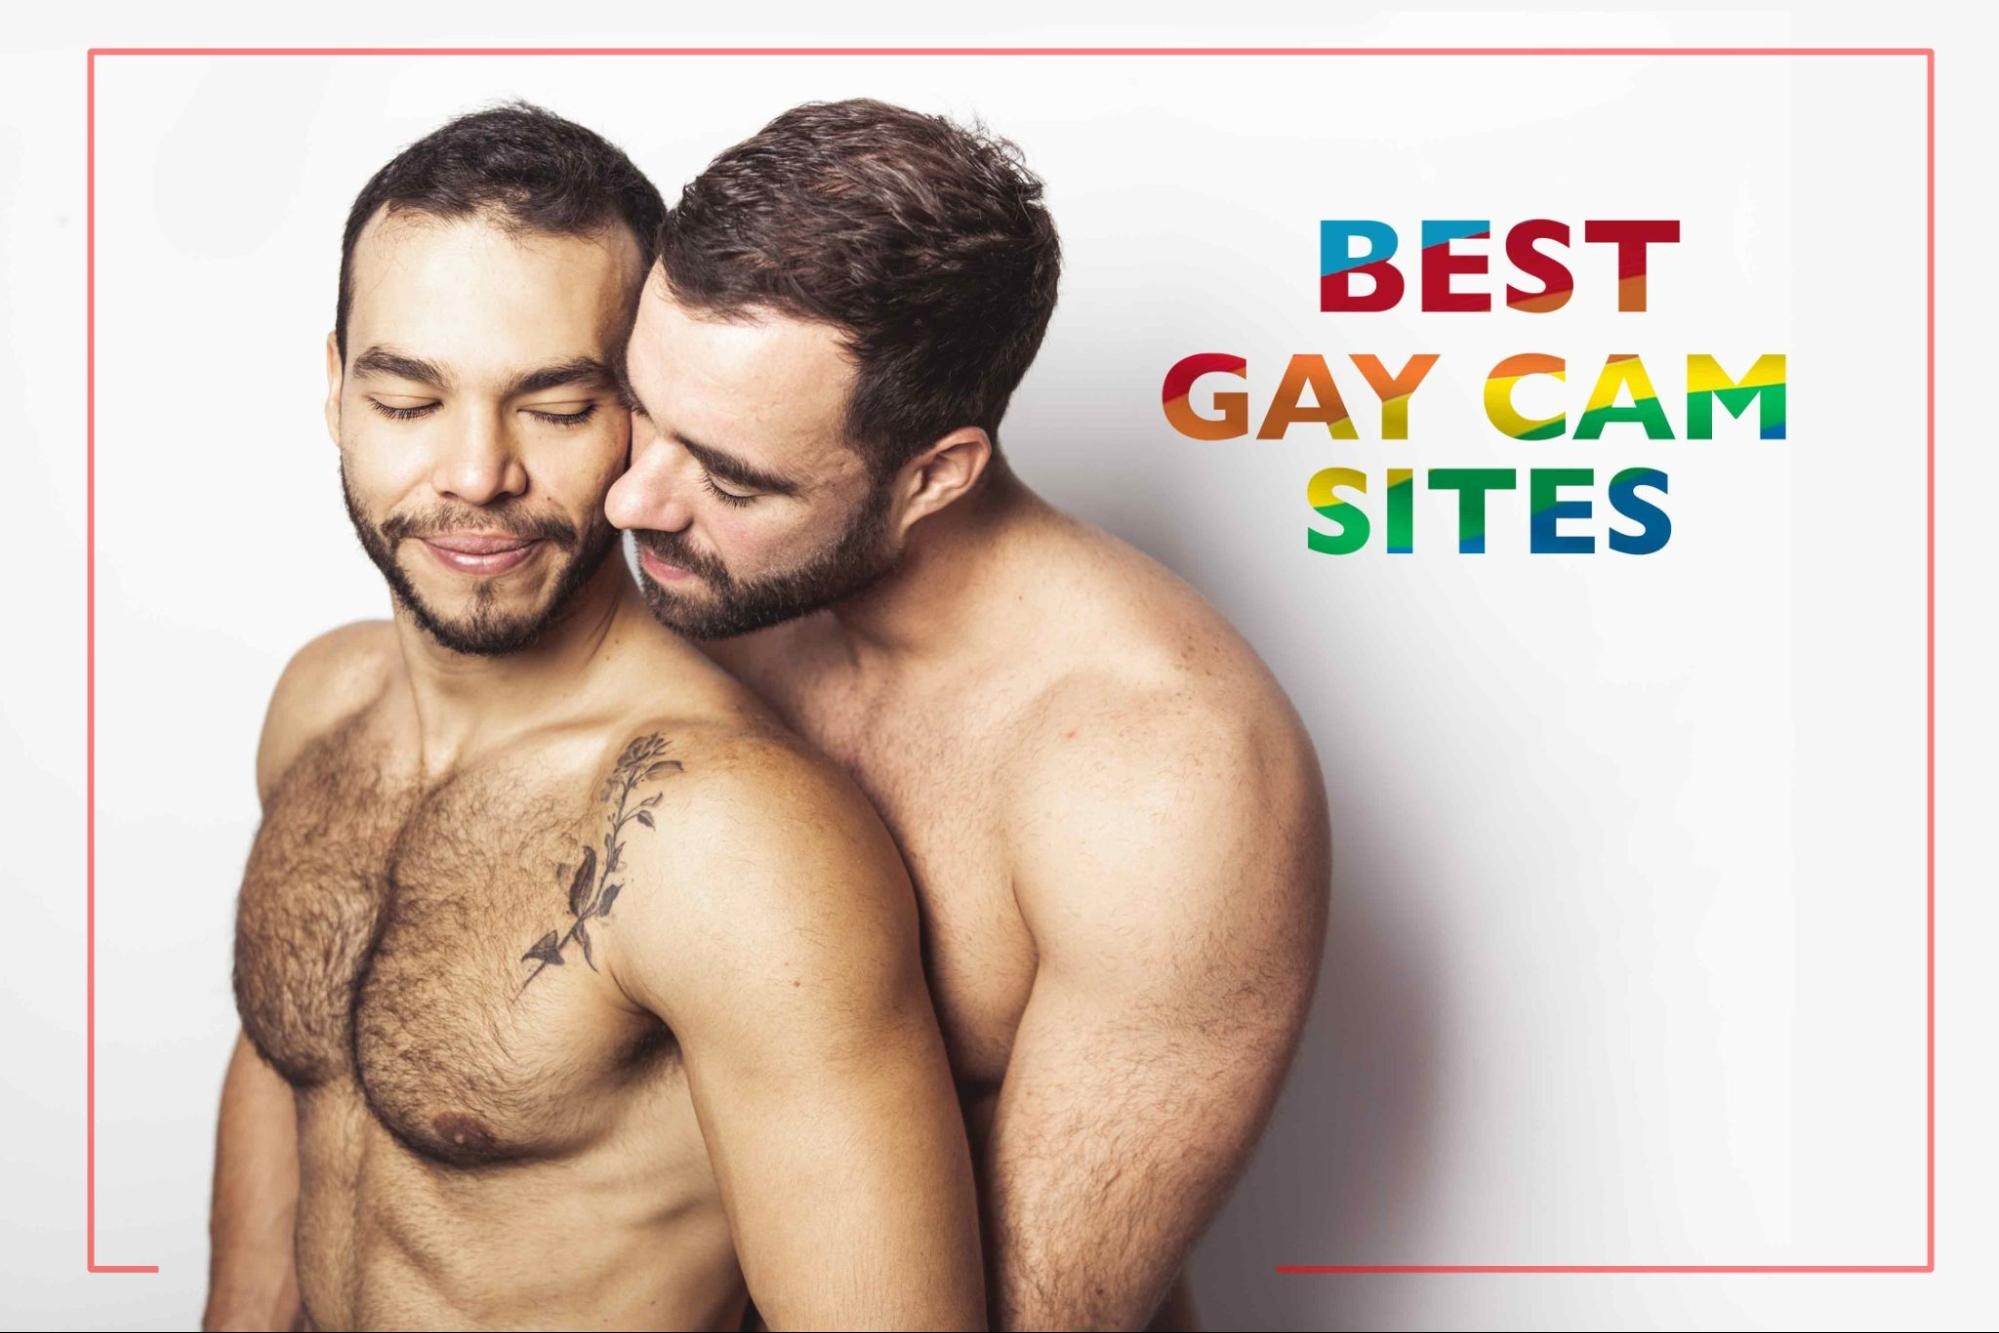 Winkelcentrum Medic Sociale wetenschappen 22 Best Gay Cam Sites and Models 2021: Top Gay Cam Shows and Live Video Chat  | Paid Content | Cleveland | Cleveland Scene